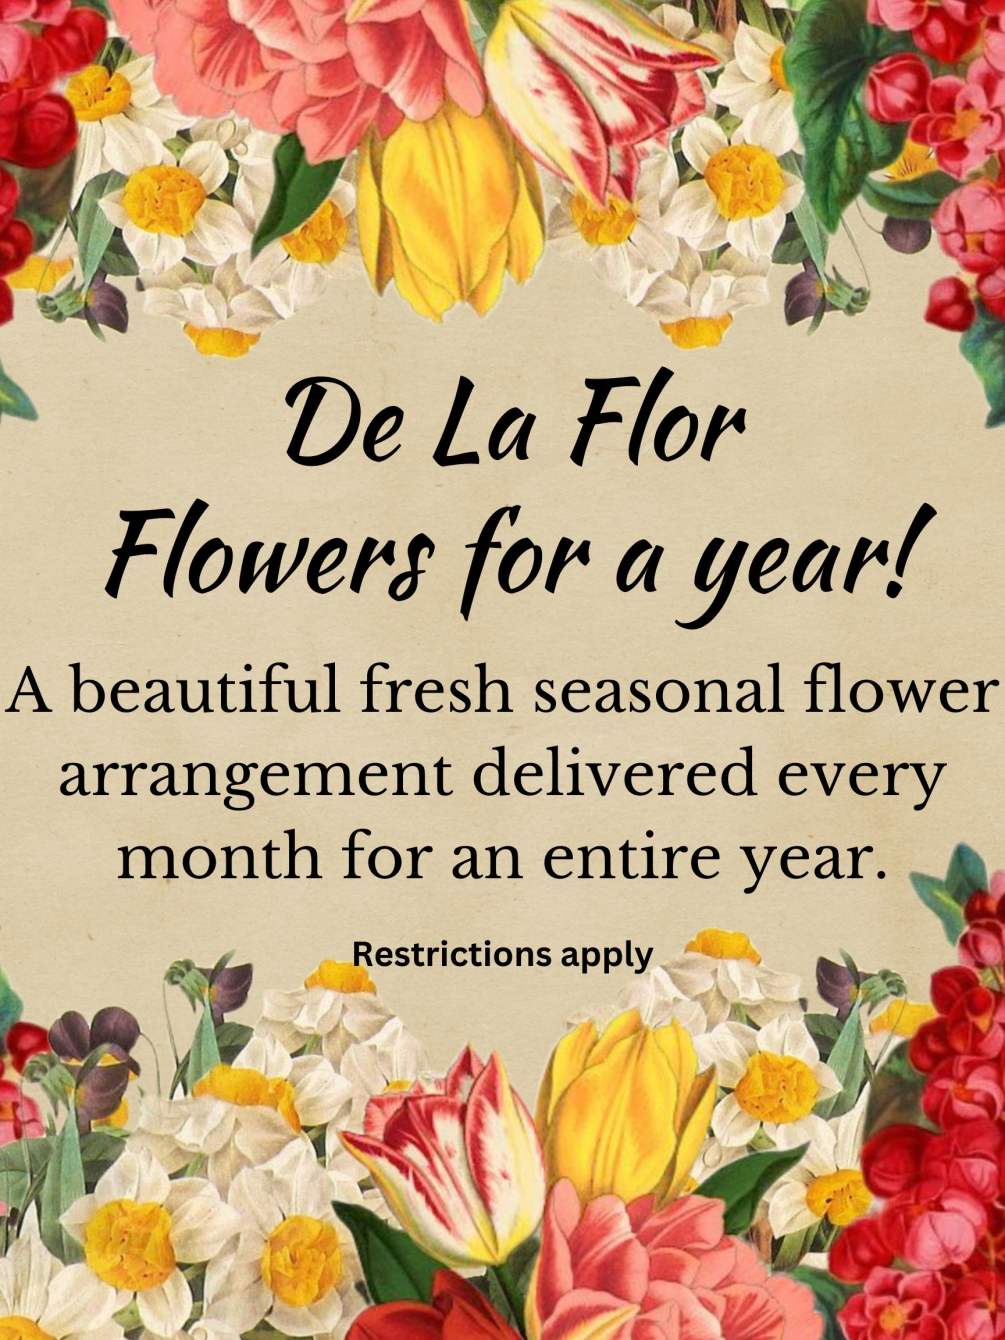 Give the gift of flowers for an entire year!  We will